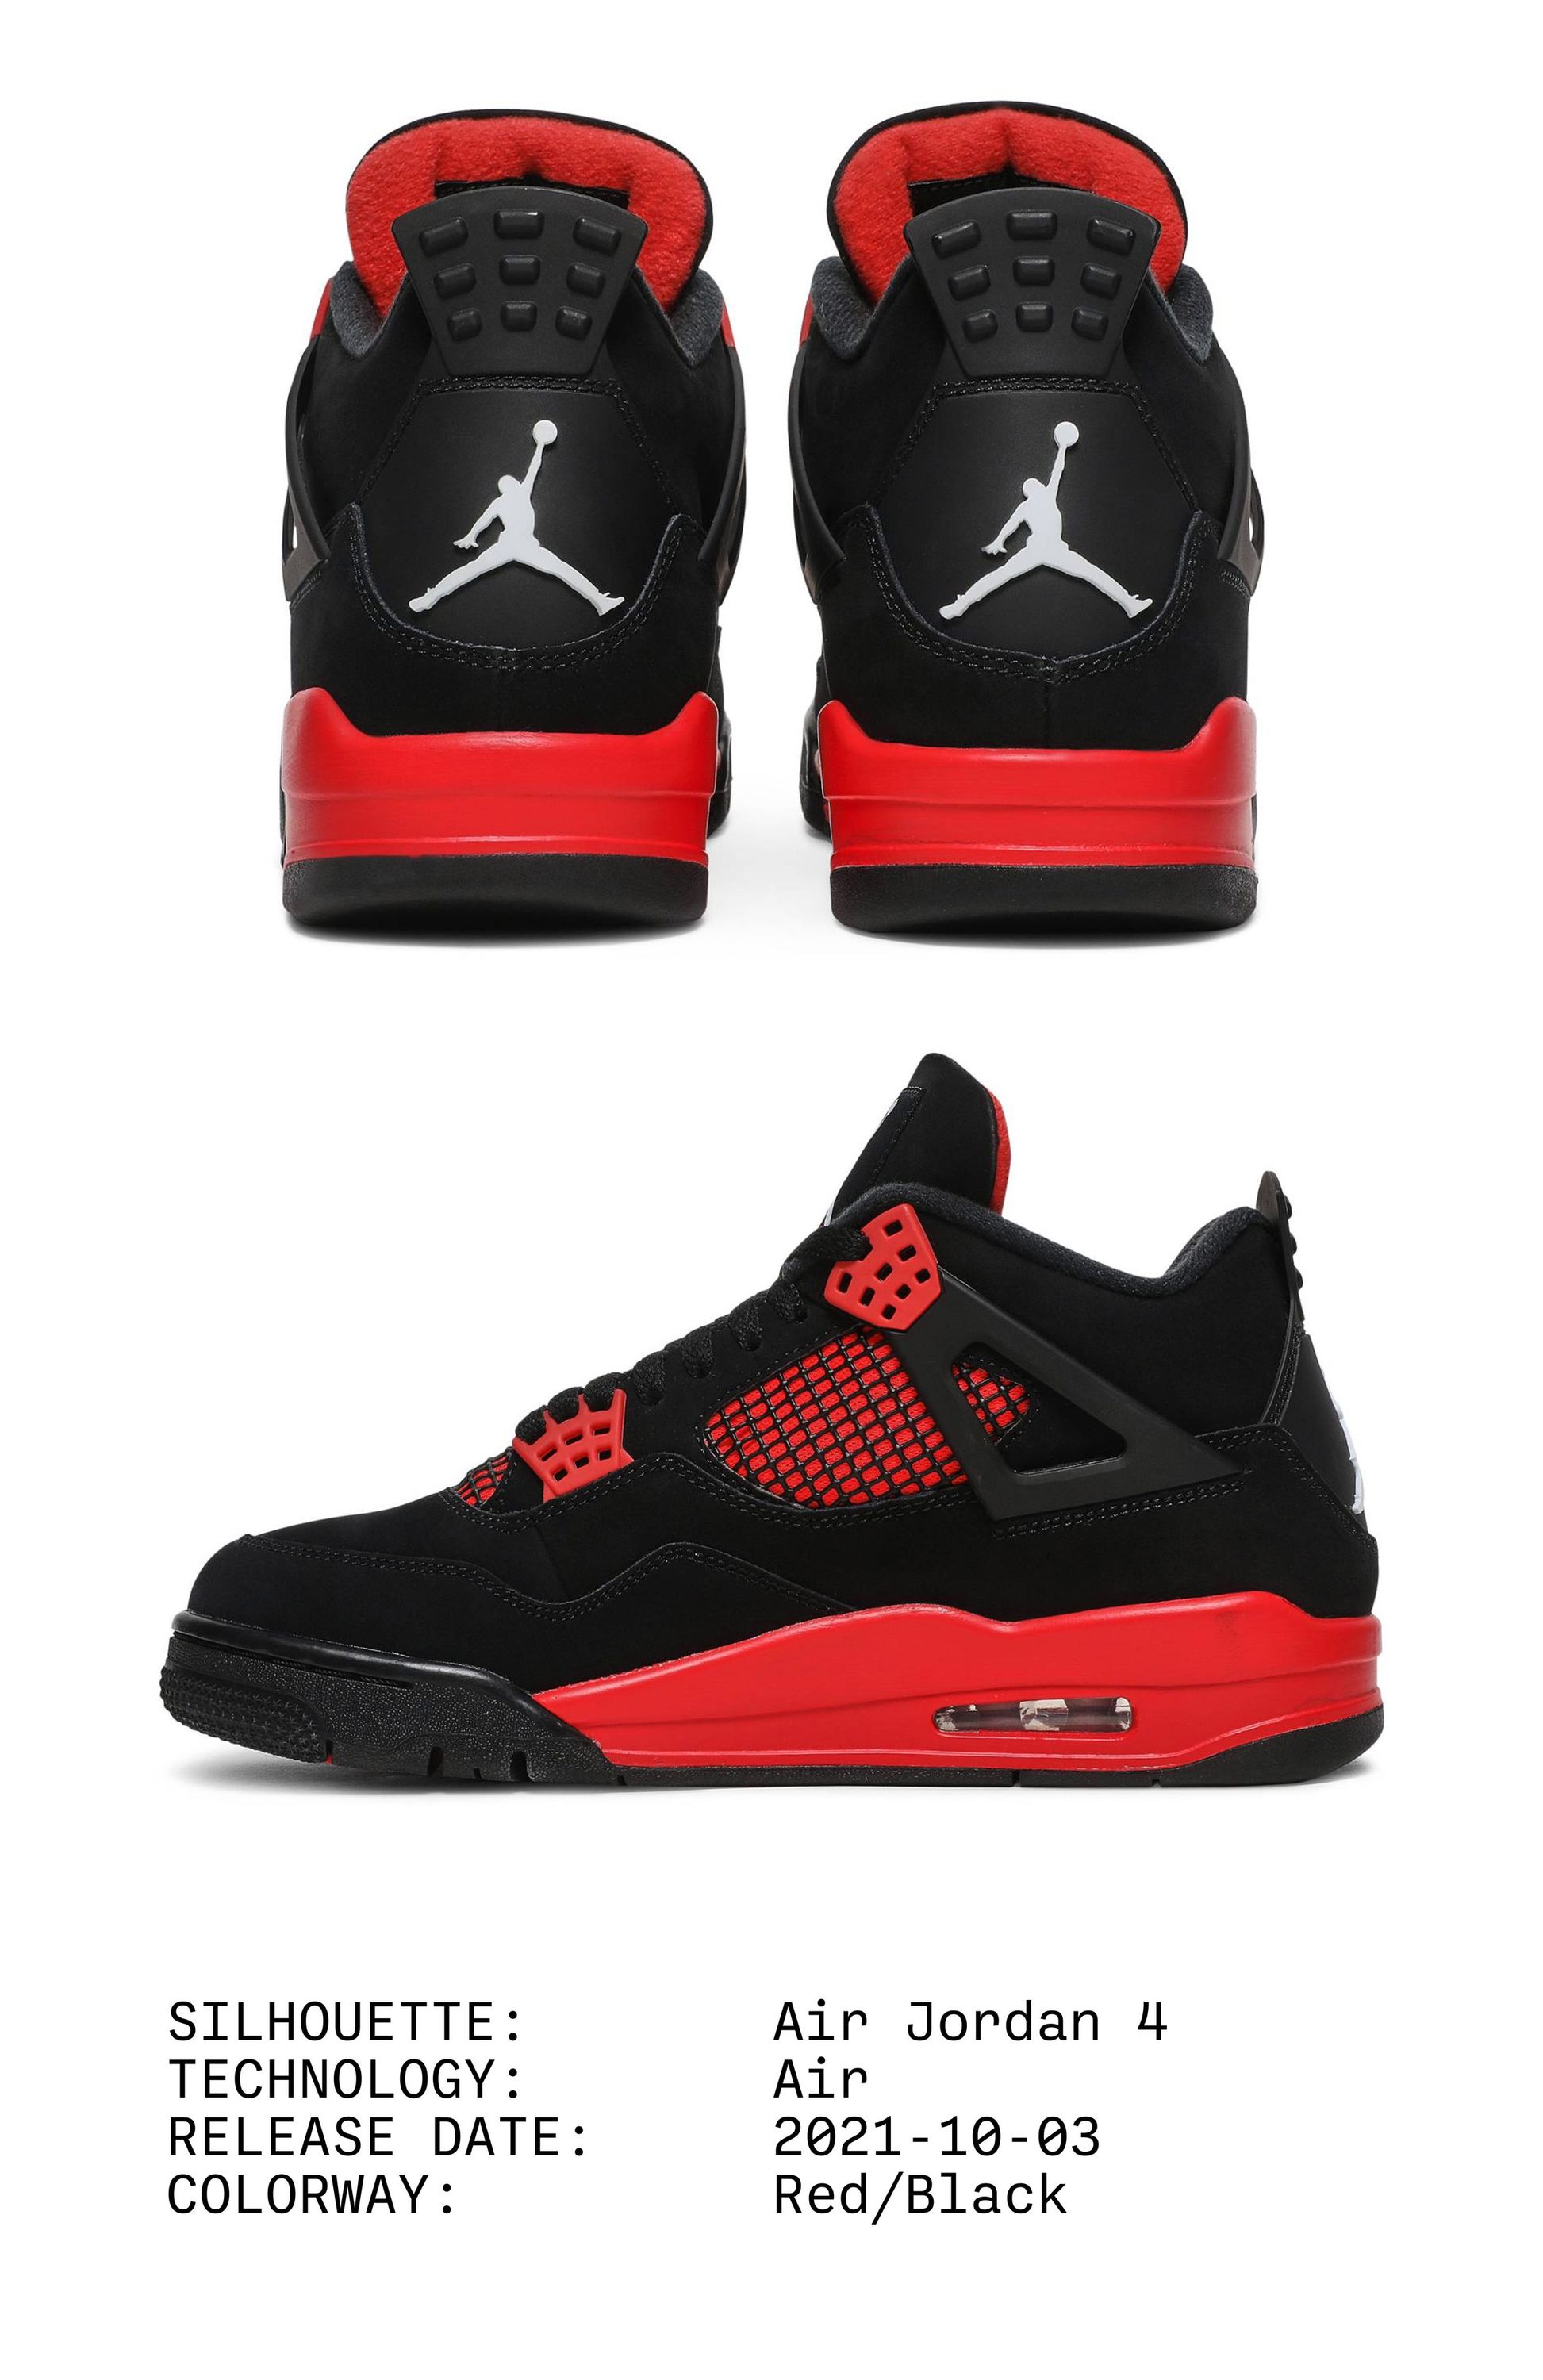 Best batches for these jordan 4s not budget. unc,red thunder and